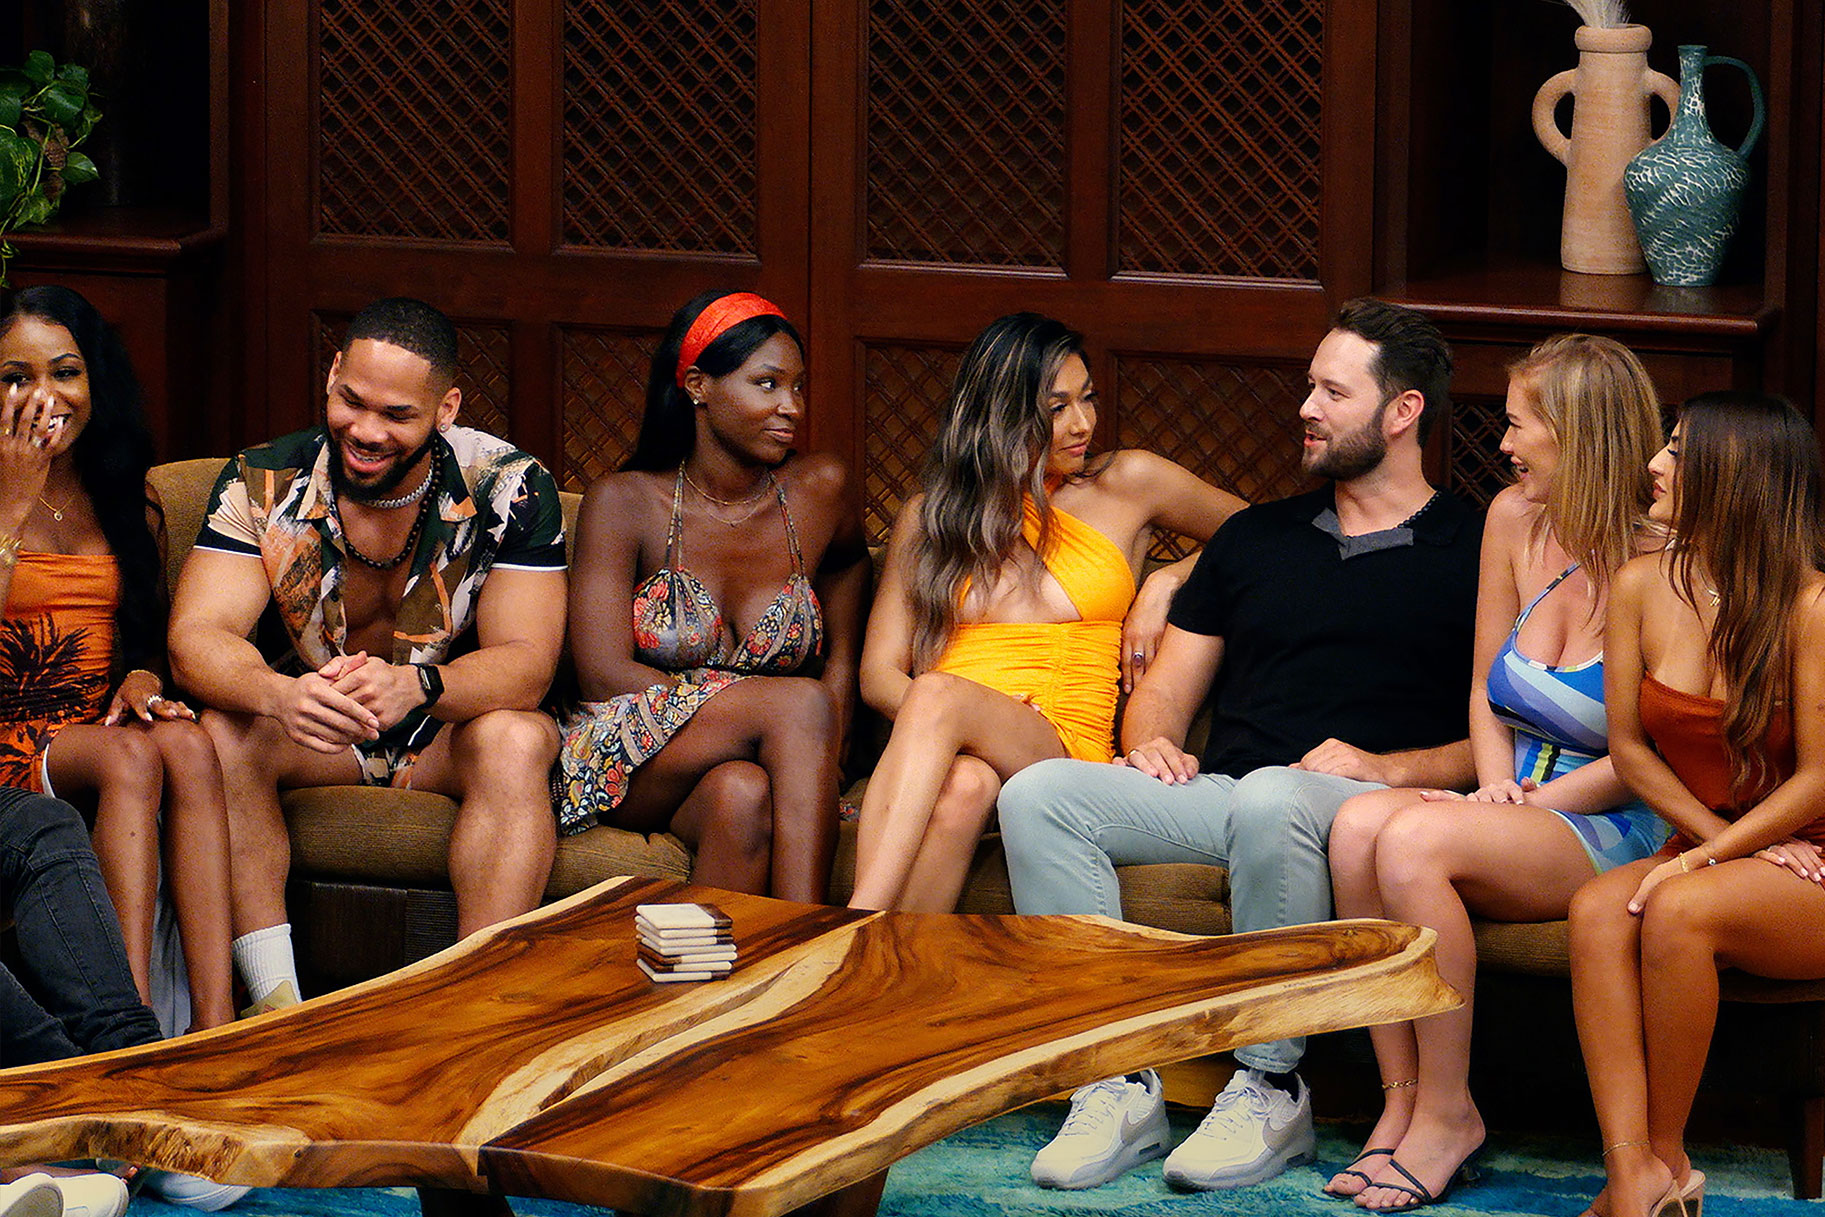 Six Temptation Island Singles congregated on a couch